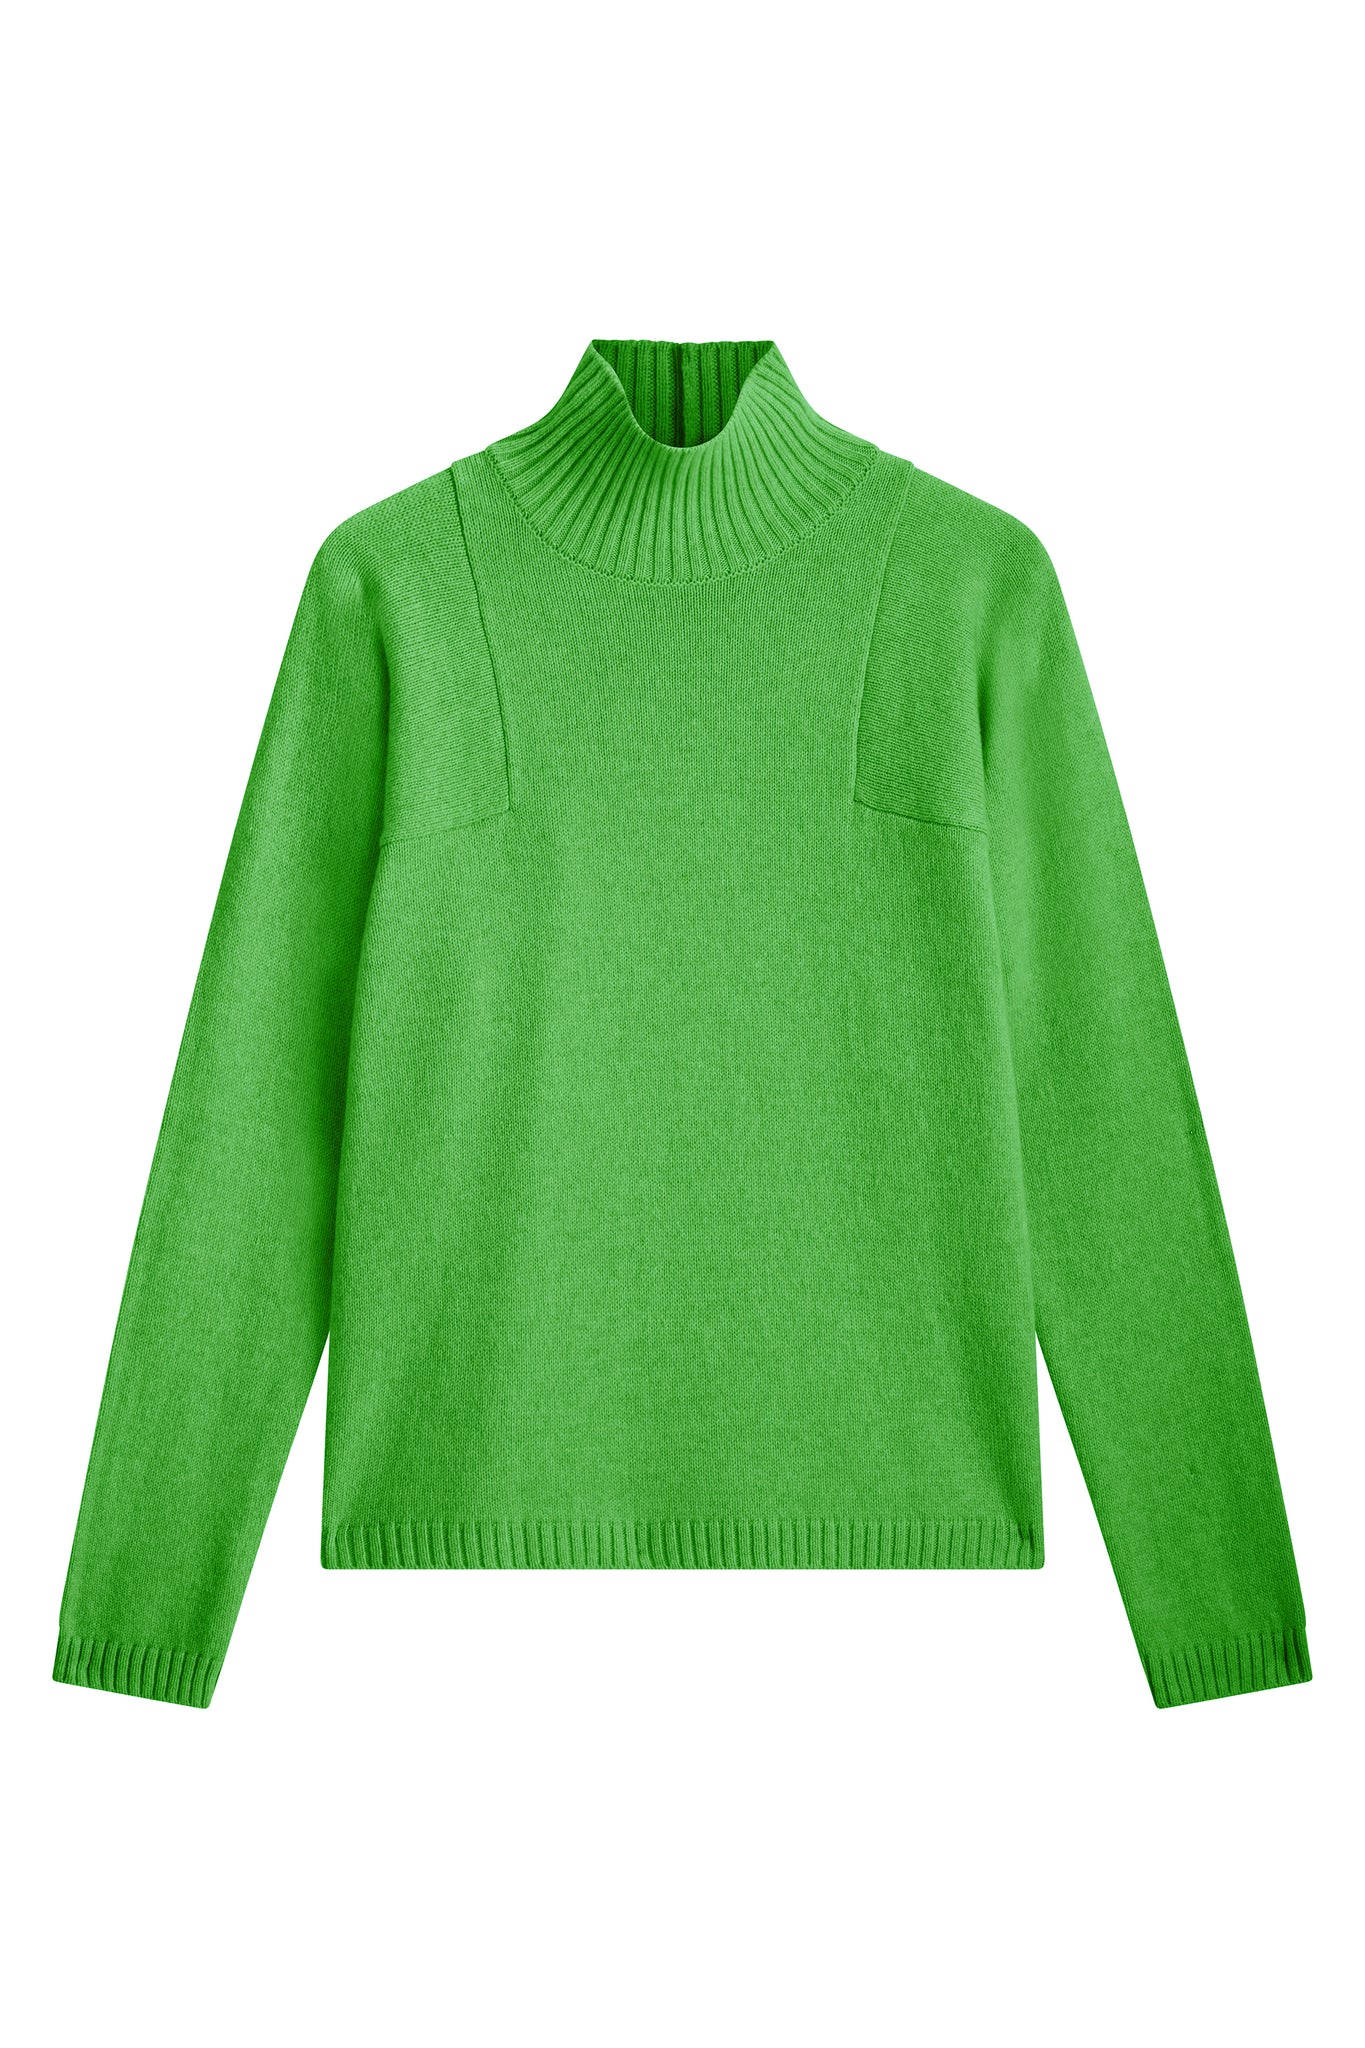 bright green cashmere turtle neck with deep modified drop sleeves